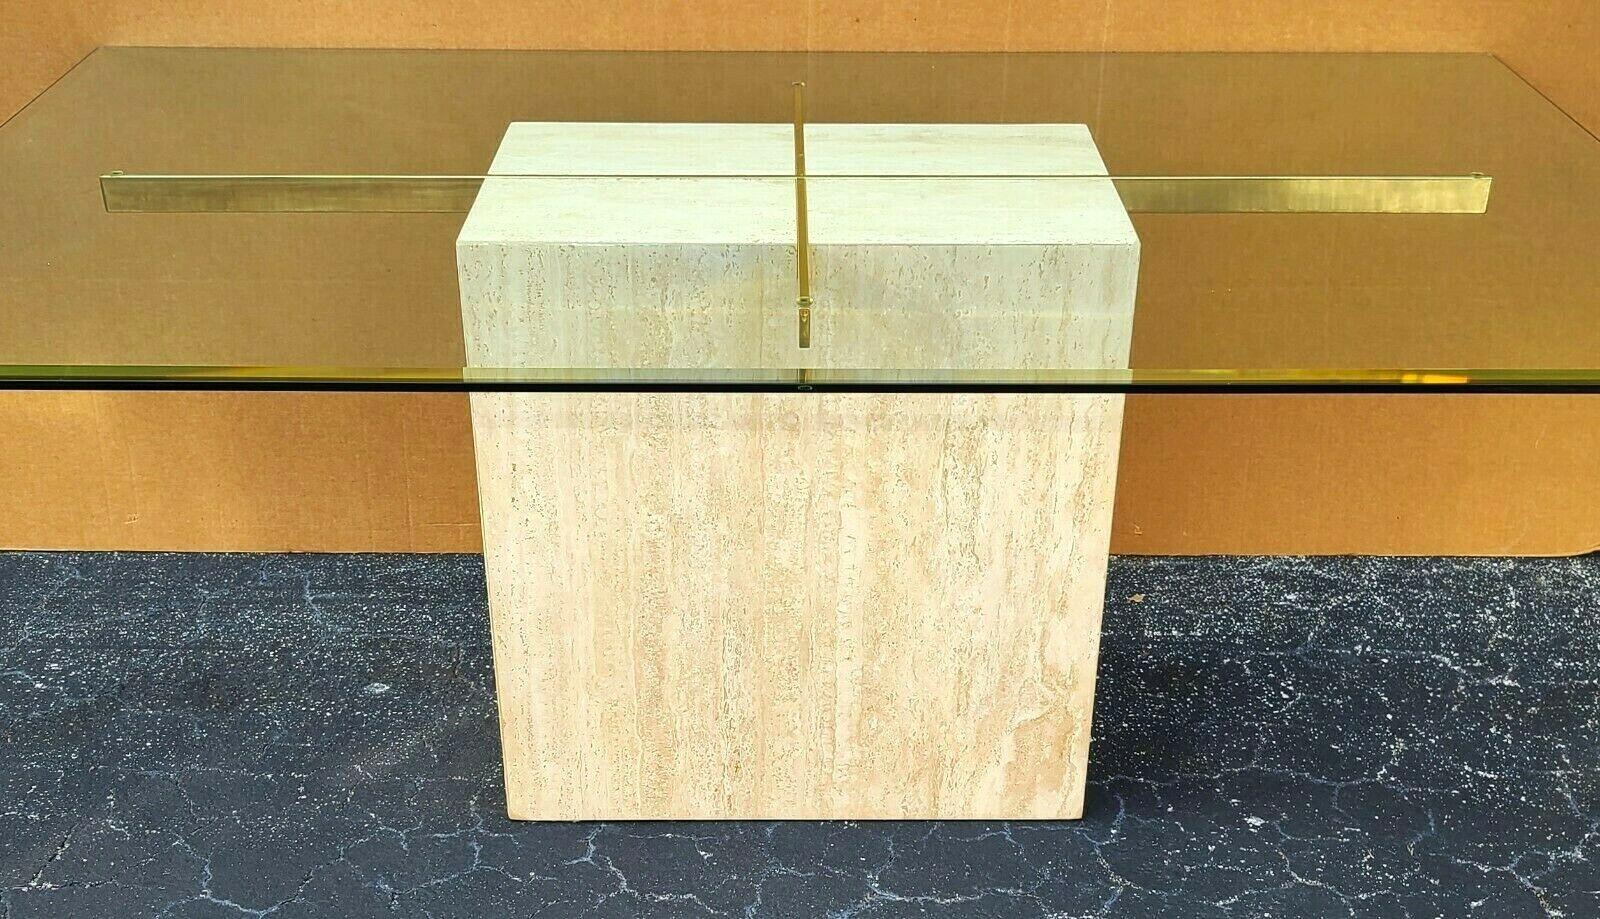 Offering one of our recent Palm Beach Estate fine furniture acquisitions of a MCM Ello Italian travertine marble & glass dining table

Approximate measurements in inches:
28.75